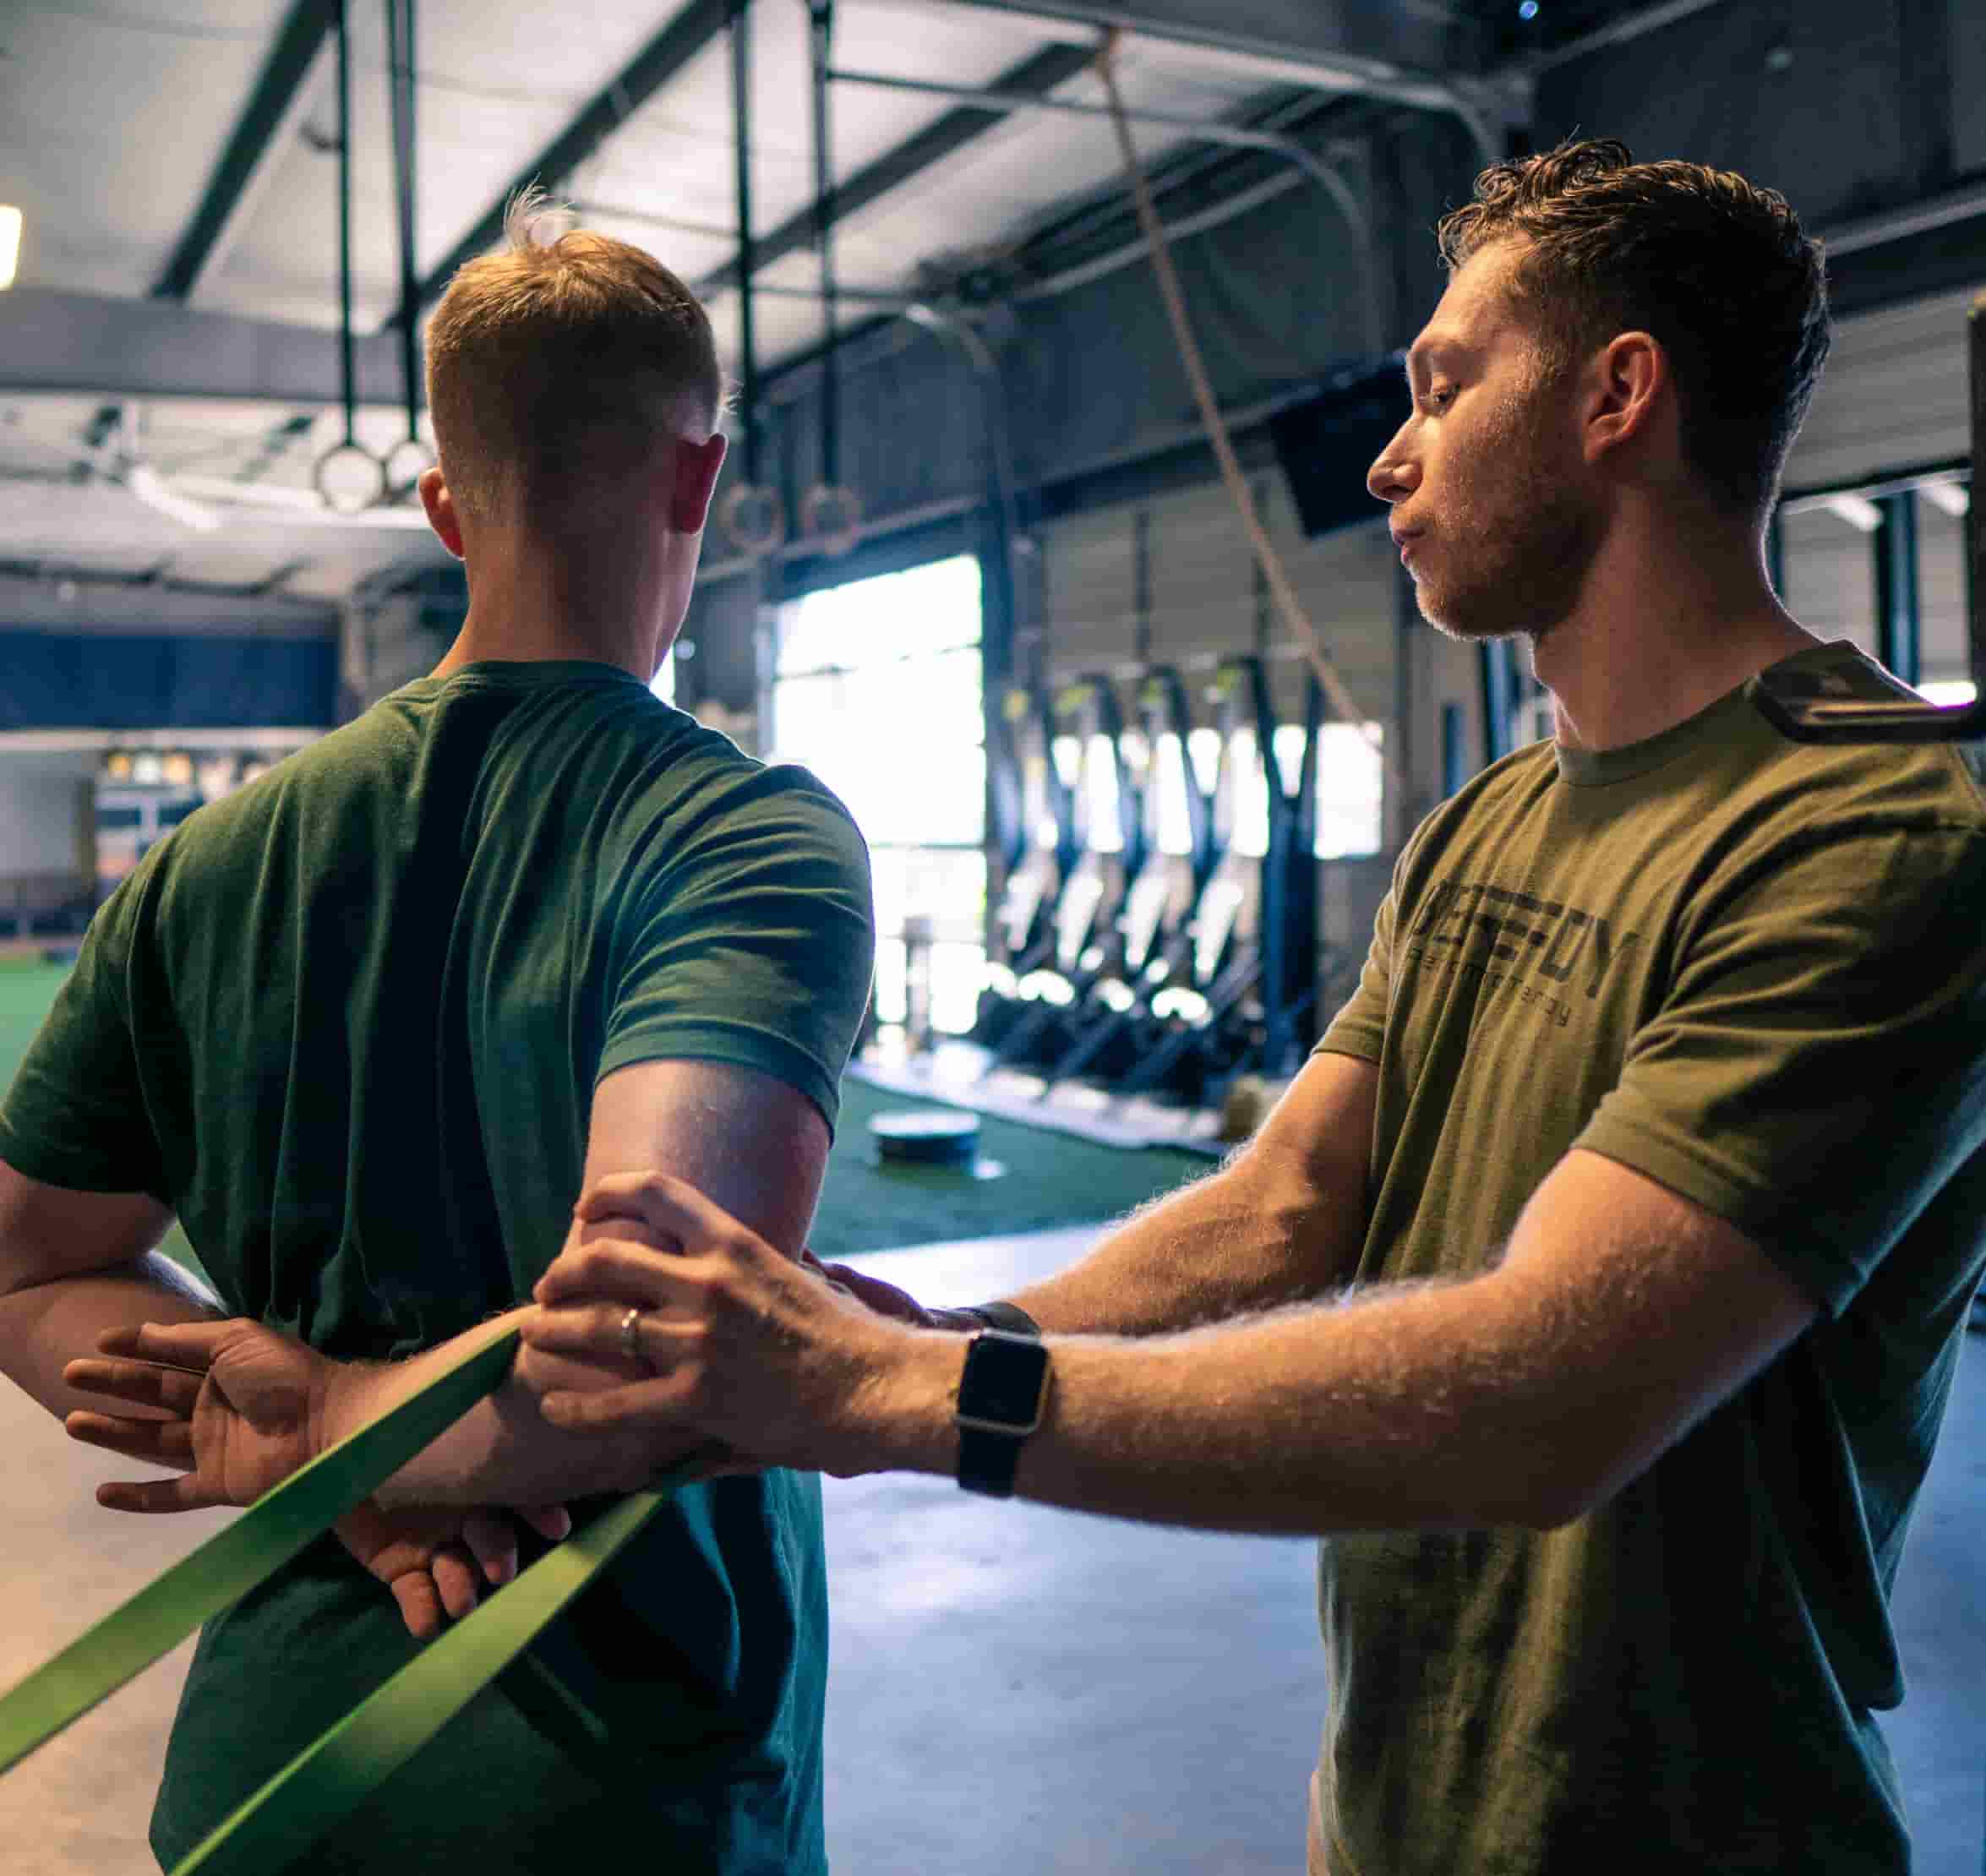 Two men in a gym, one assisting the other with stretching exercises using a resistance band, both wearing green t-shirts in a spacious fitness center.